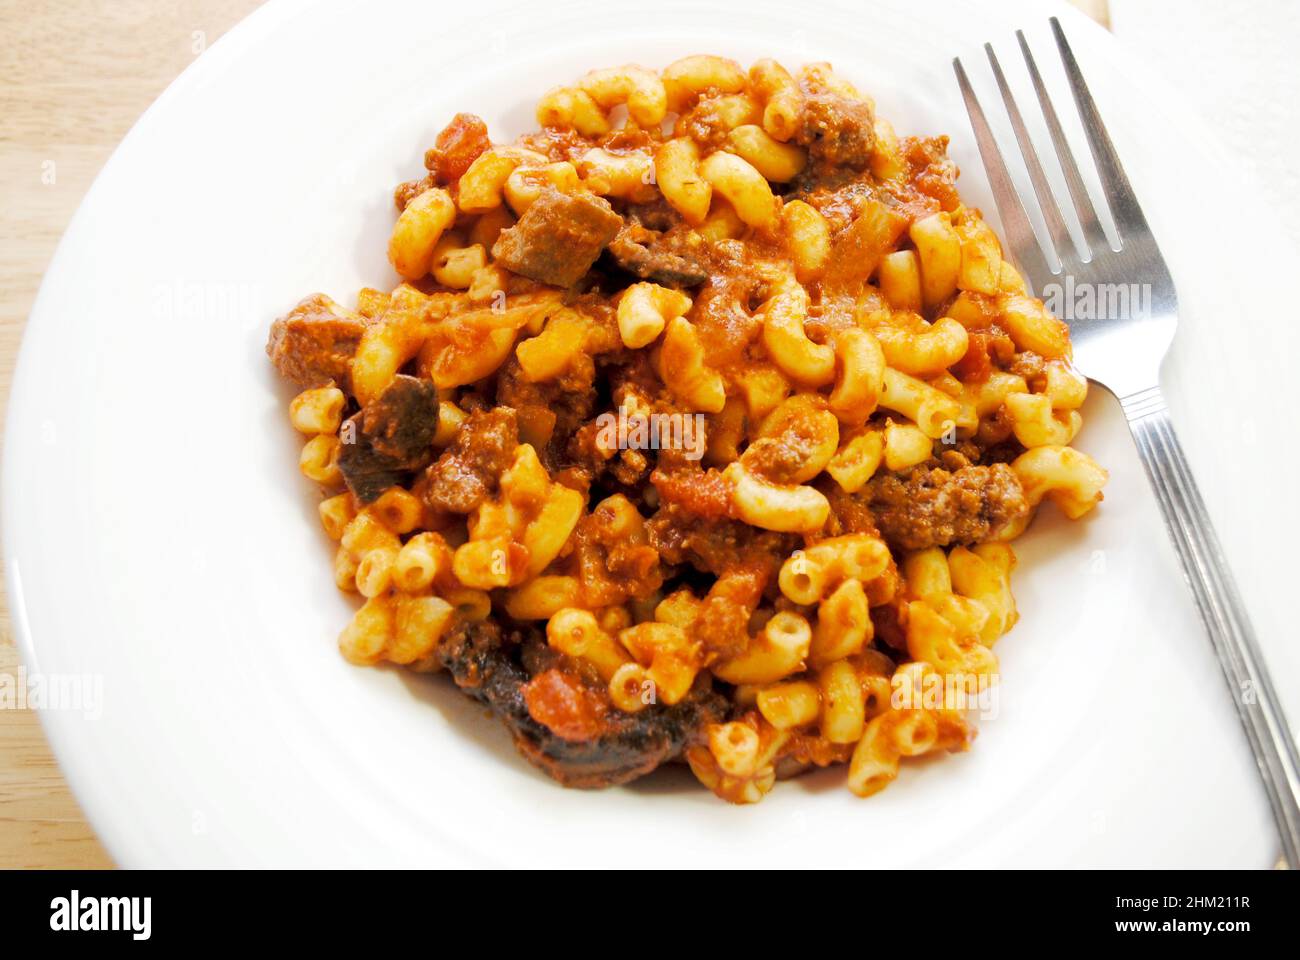 Elbow Macaroni with Bolognese Meat Sauce Stock Photo